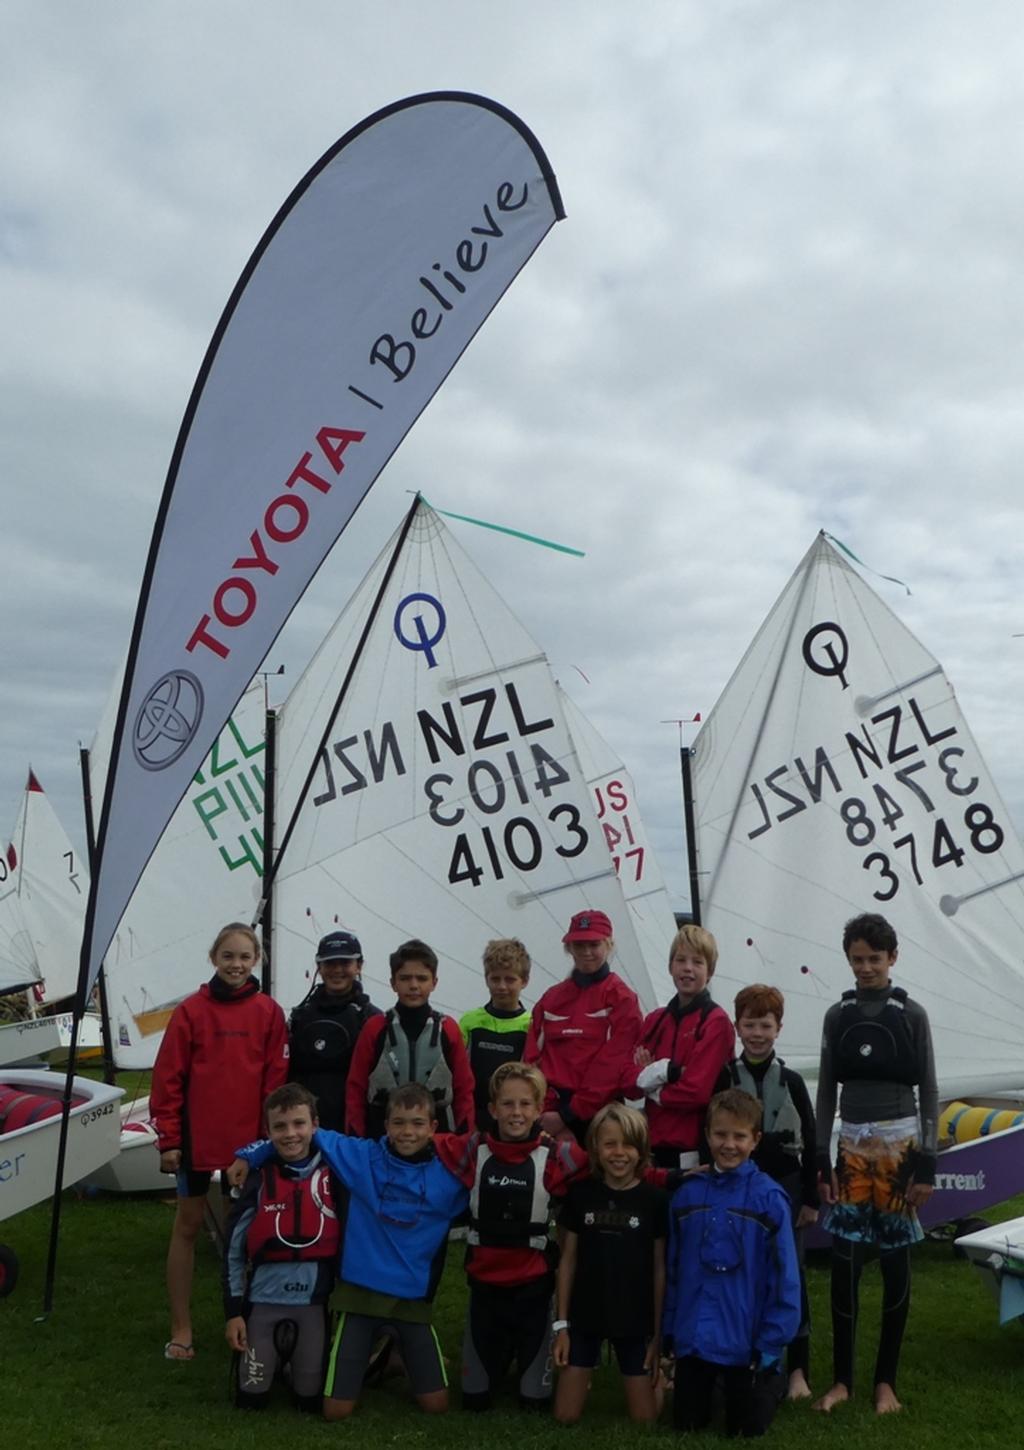 The Open and Green Fleets from Napier Sailing Club - Looking forward to hosting the 2017 NZ Toyota Optimist Nationals - 2017 NZ Toyota Optimist Nationals © Rhondda Poon